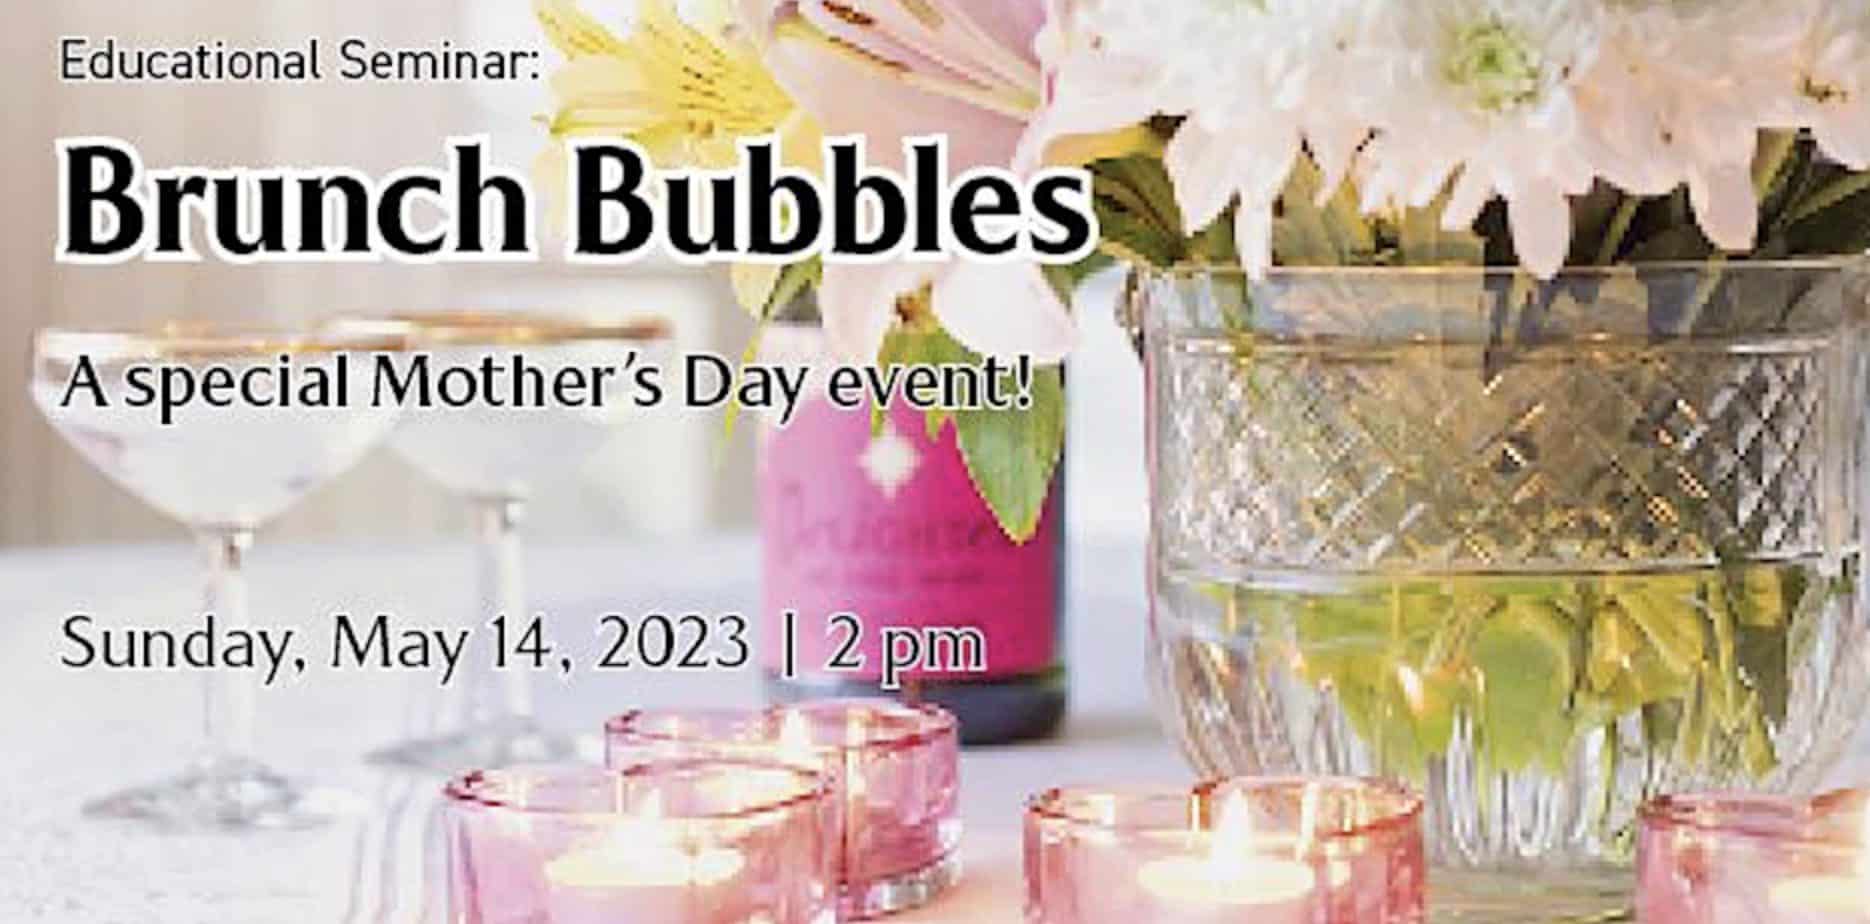 Educational Seminar- Brunch Bubbles Mother's Day Event